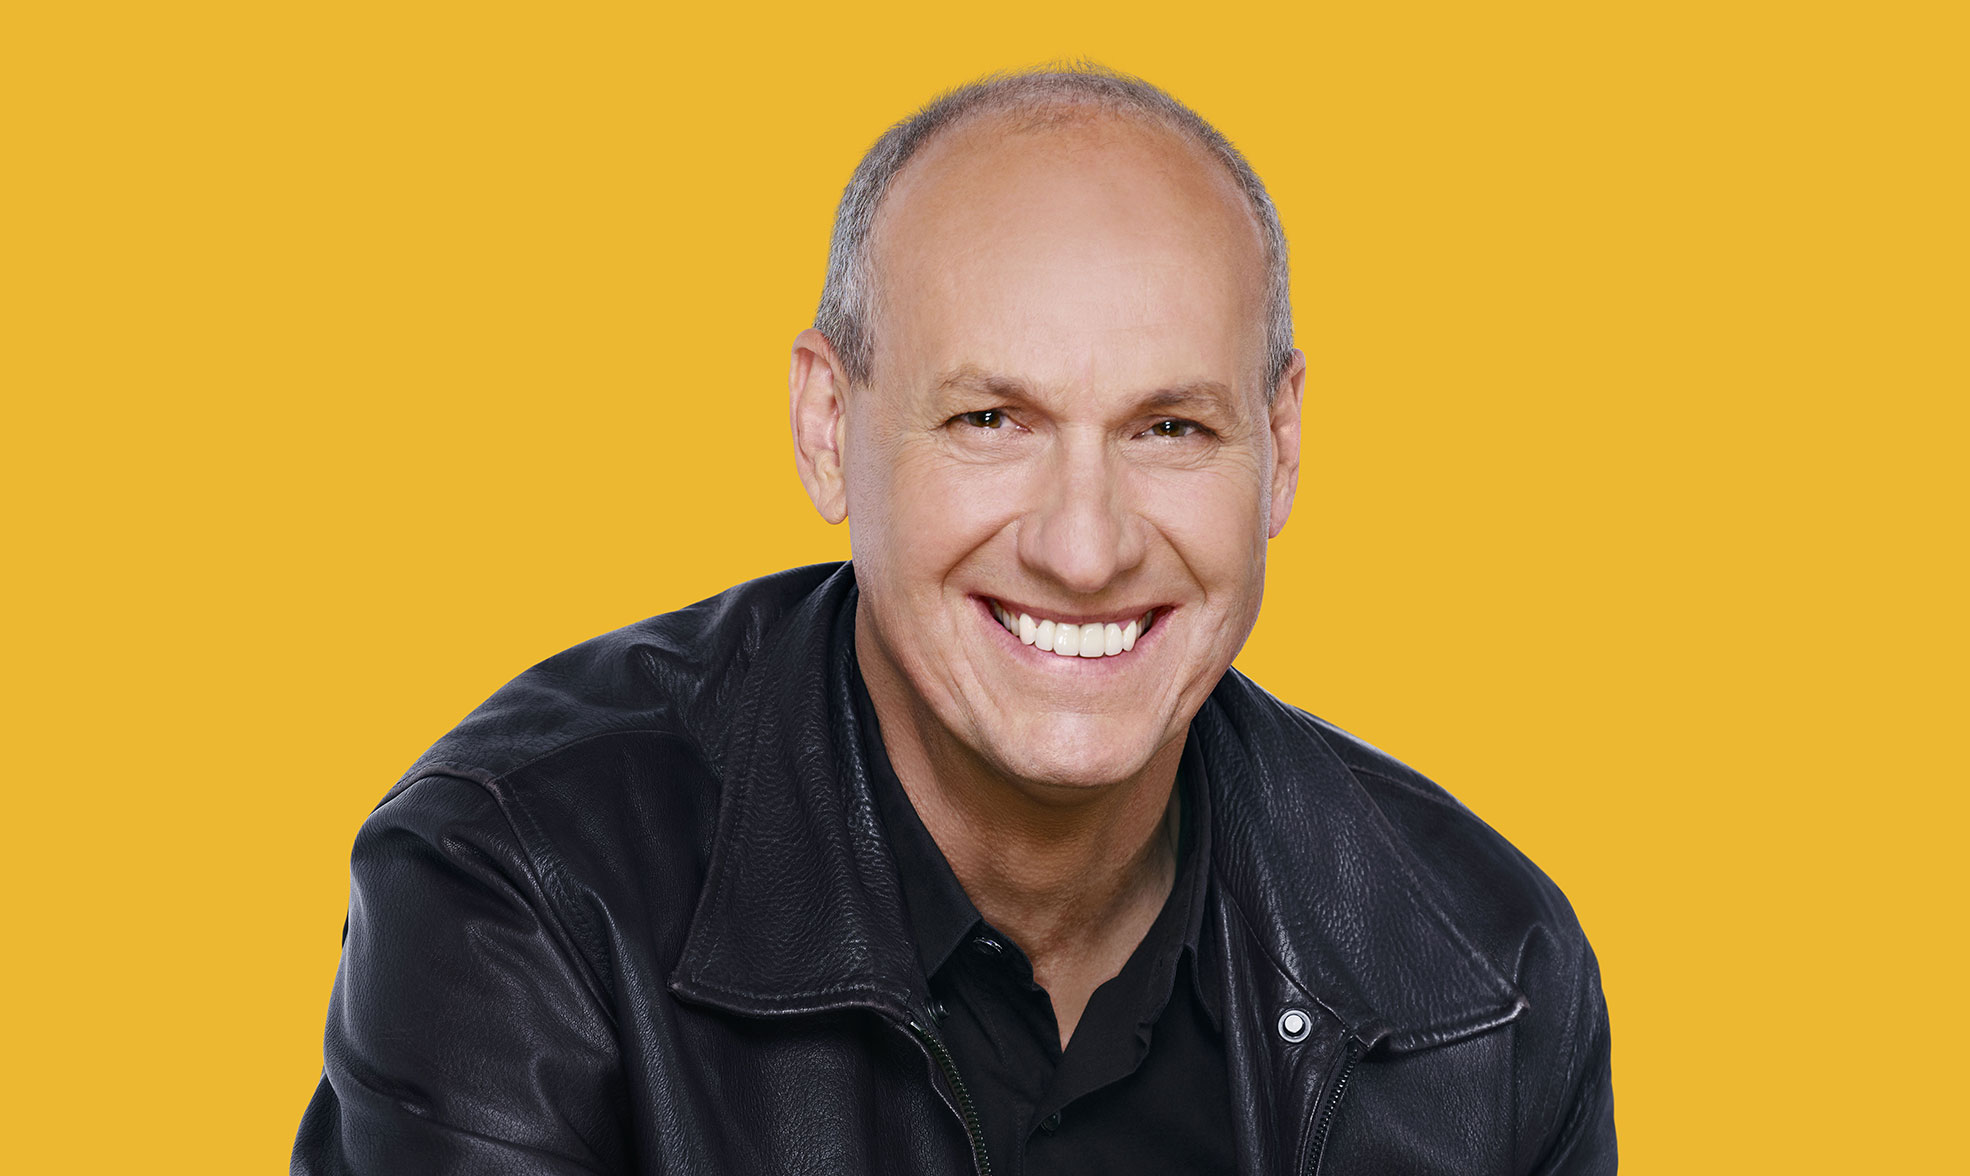 Alain Gravel, host of the Montreal morning radio show on ICI Radio-Canada Première